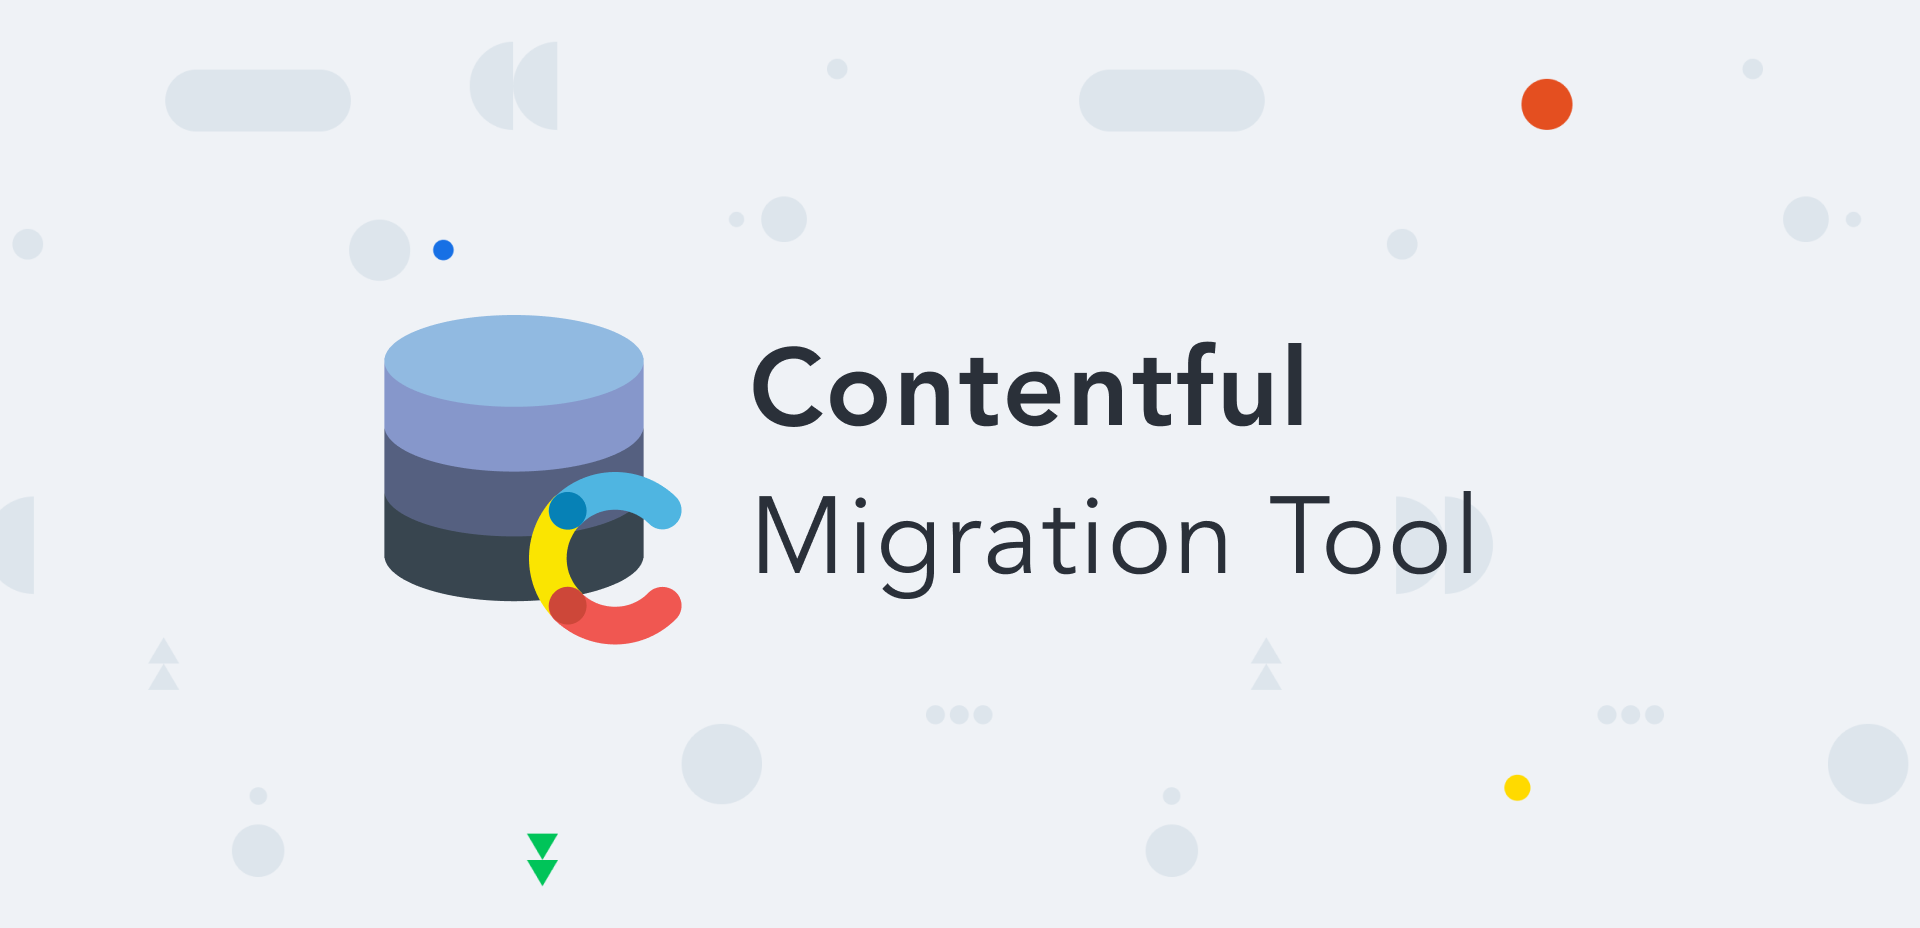 Contentful Migration Tool